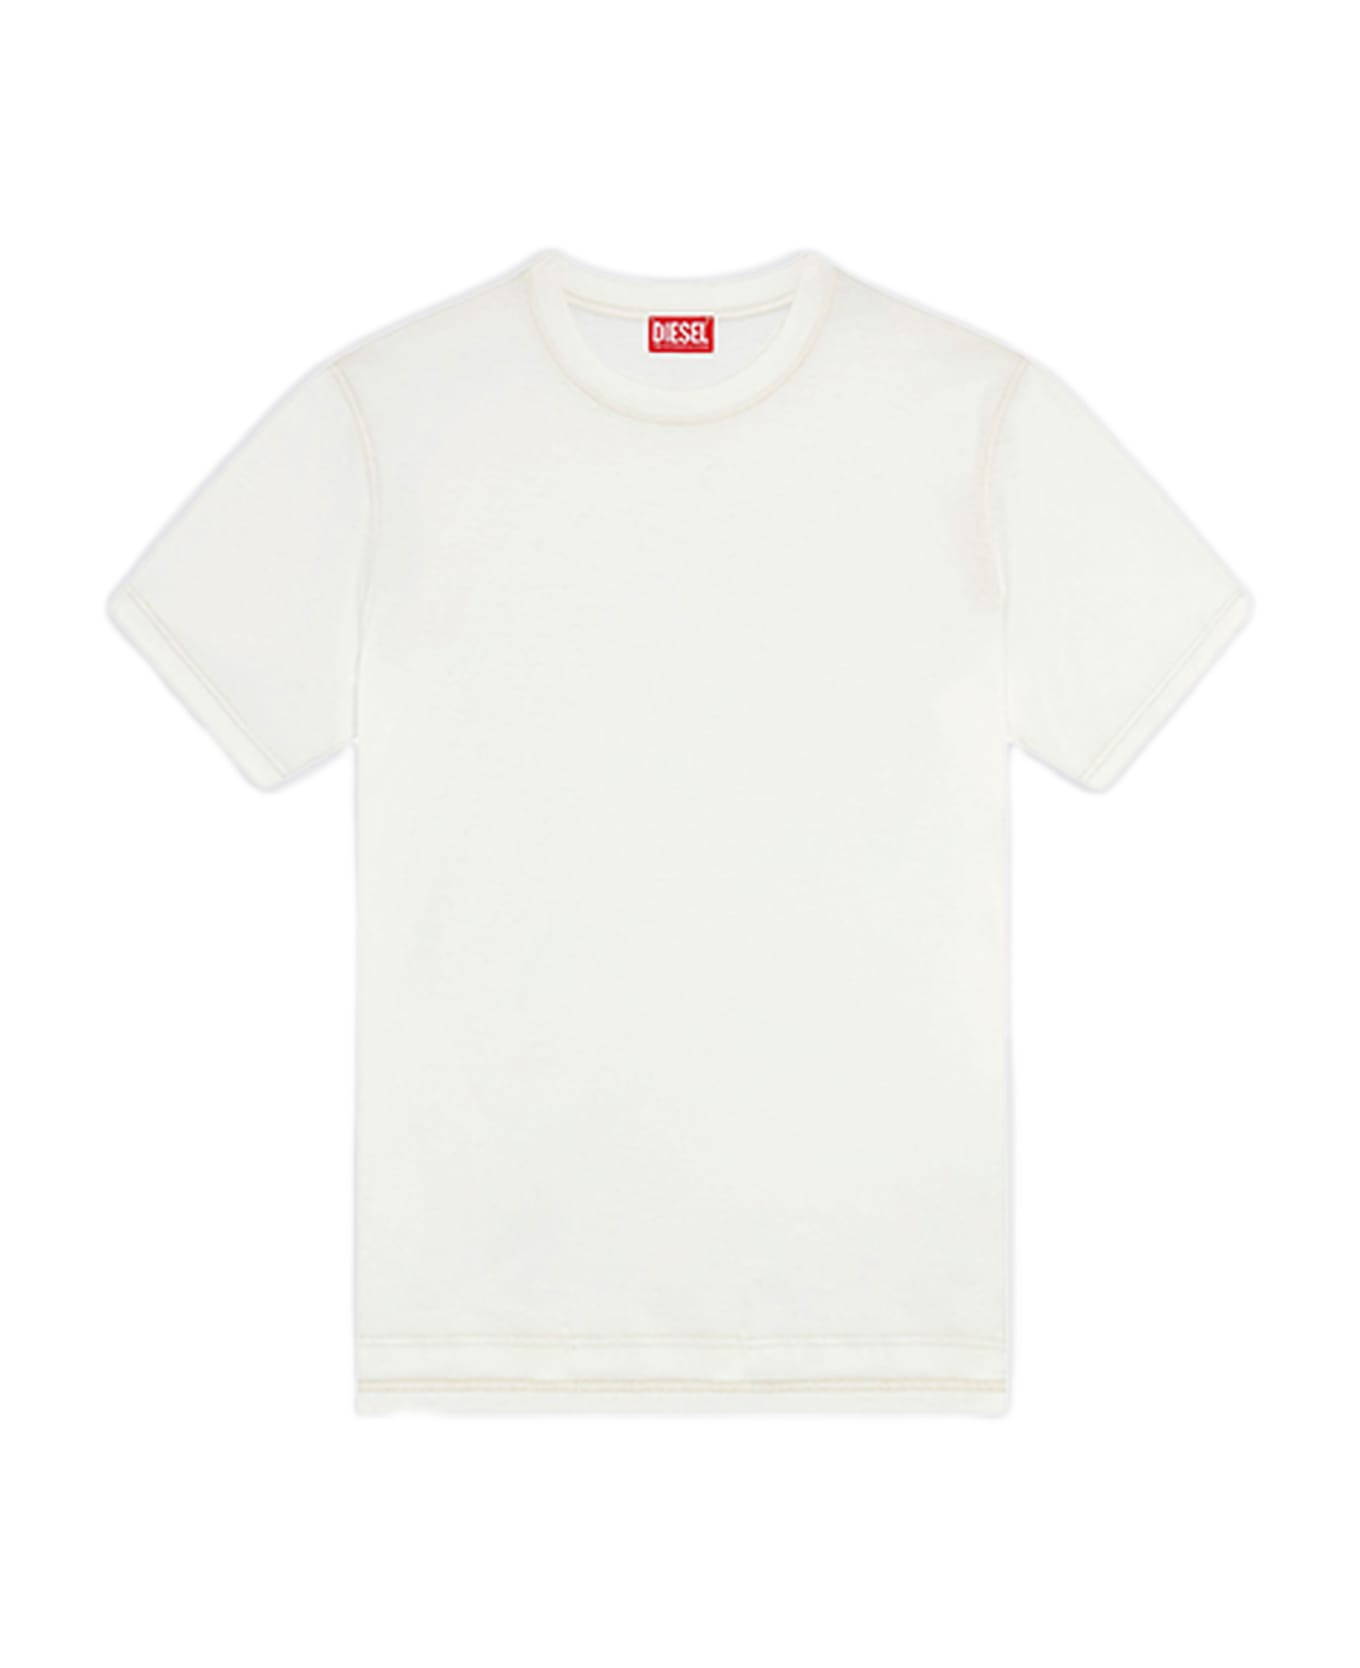 Diesel T-must-slits-n2 White cotton t-shirt with tonal print - T Must Slits N2 - Bianco